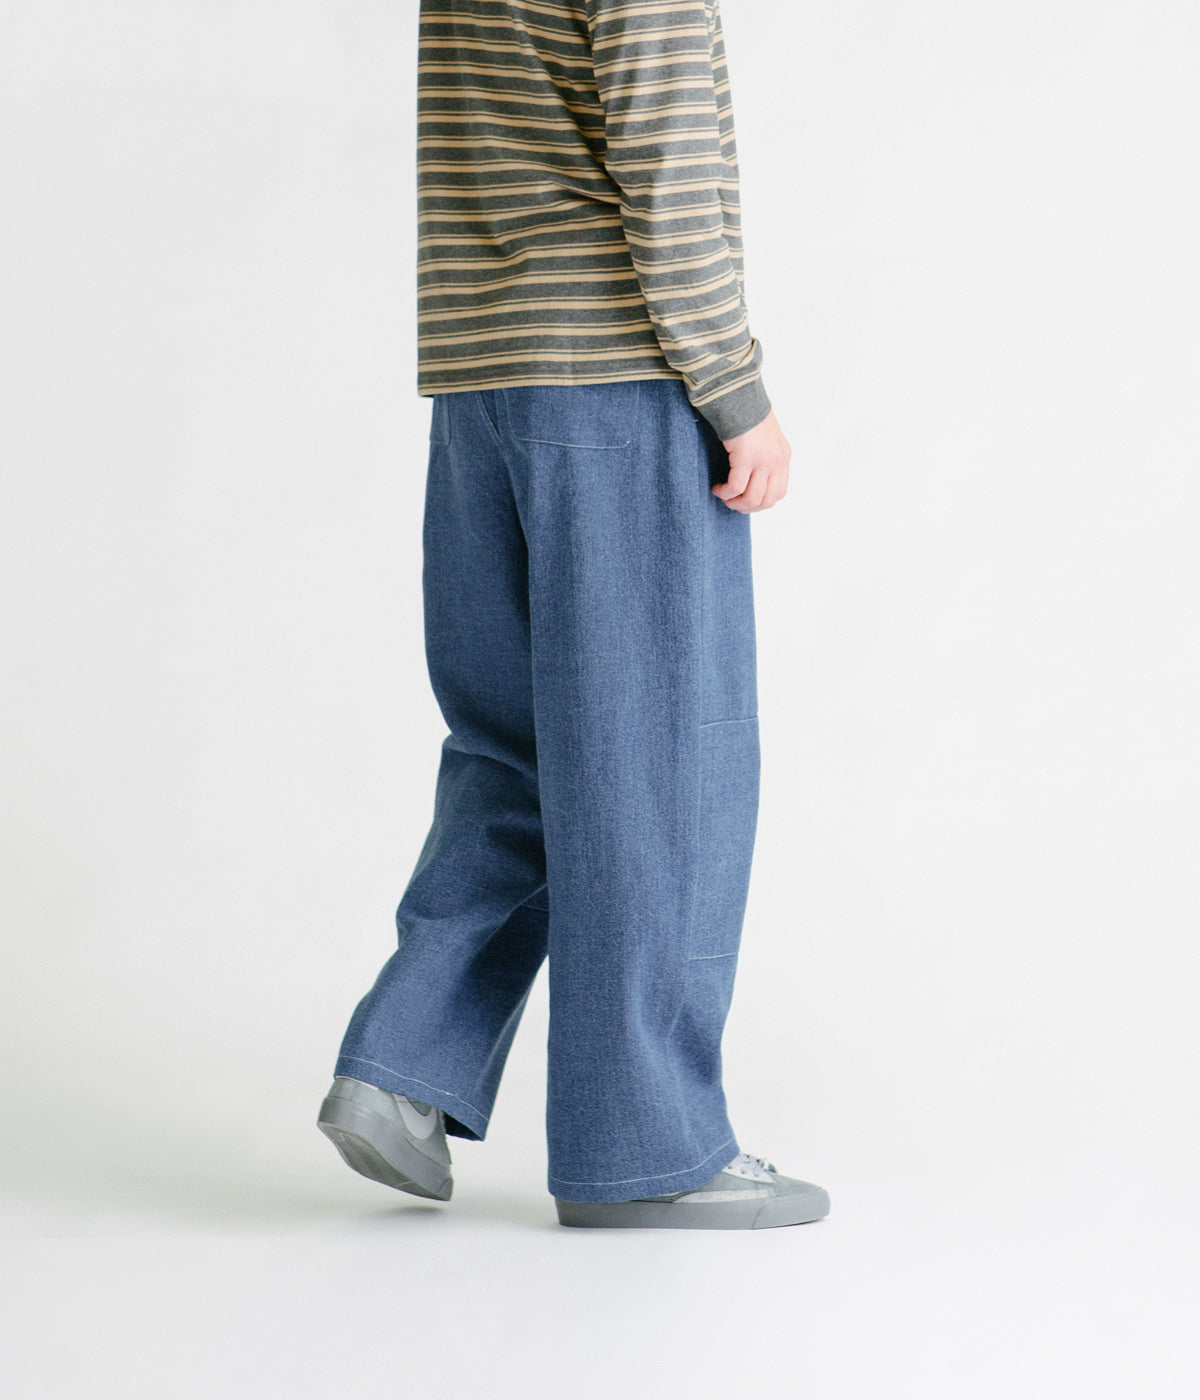 Poetic Collective Sculptor Pants - Light Blue / White